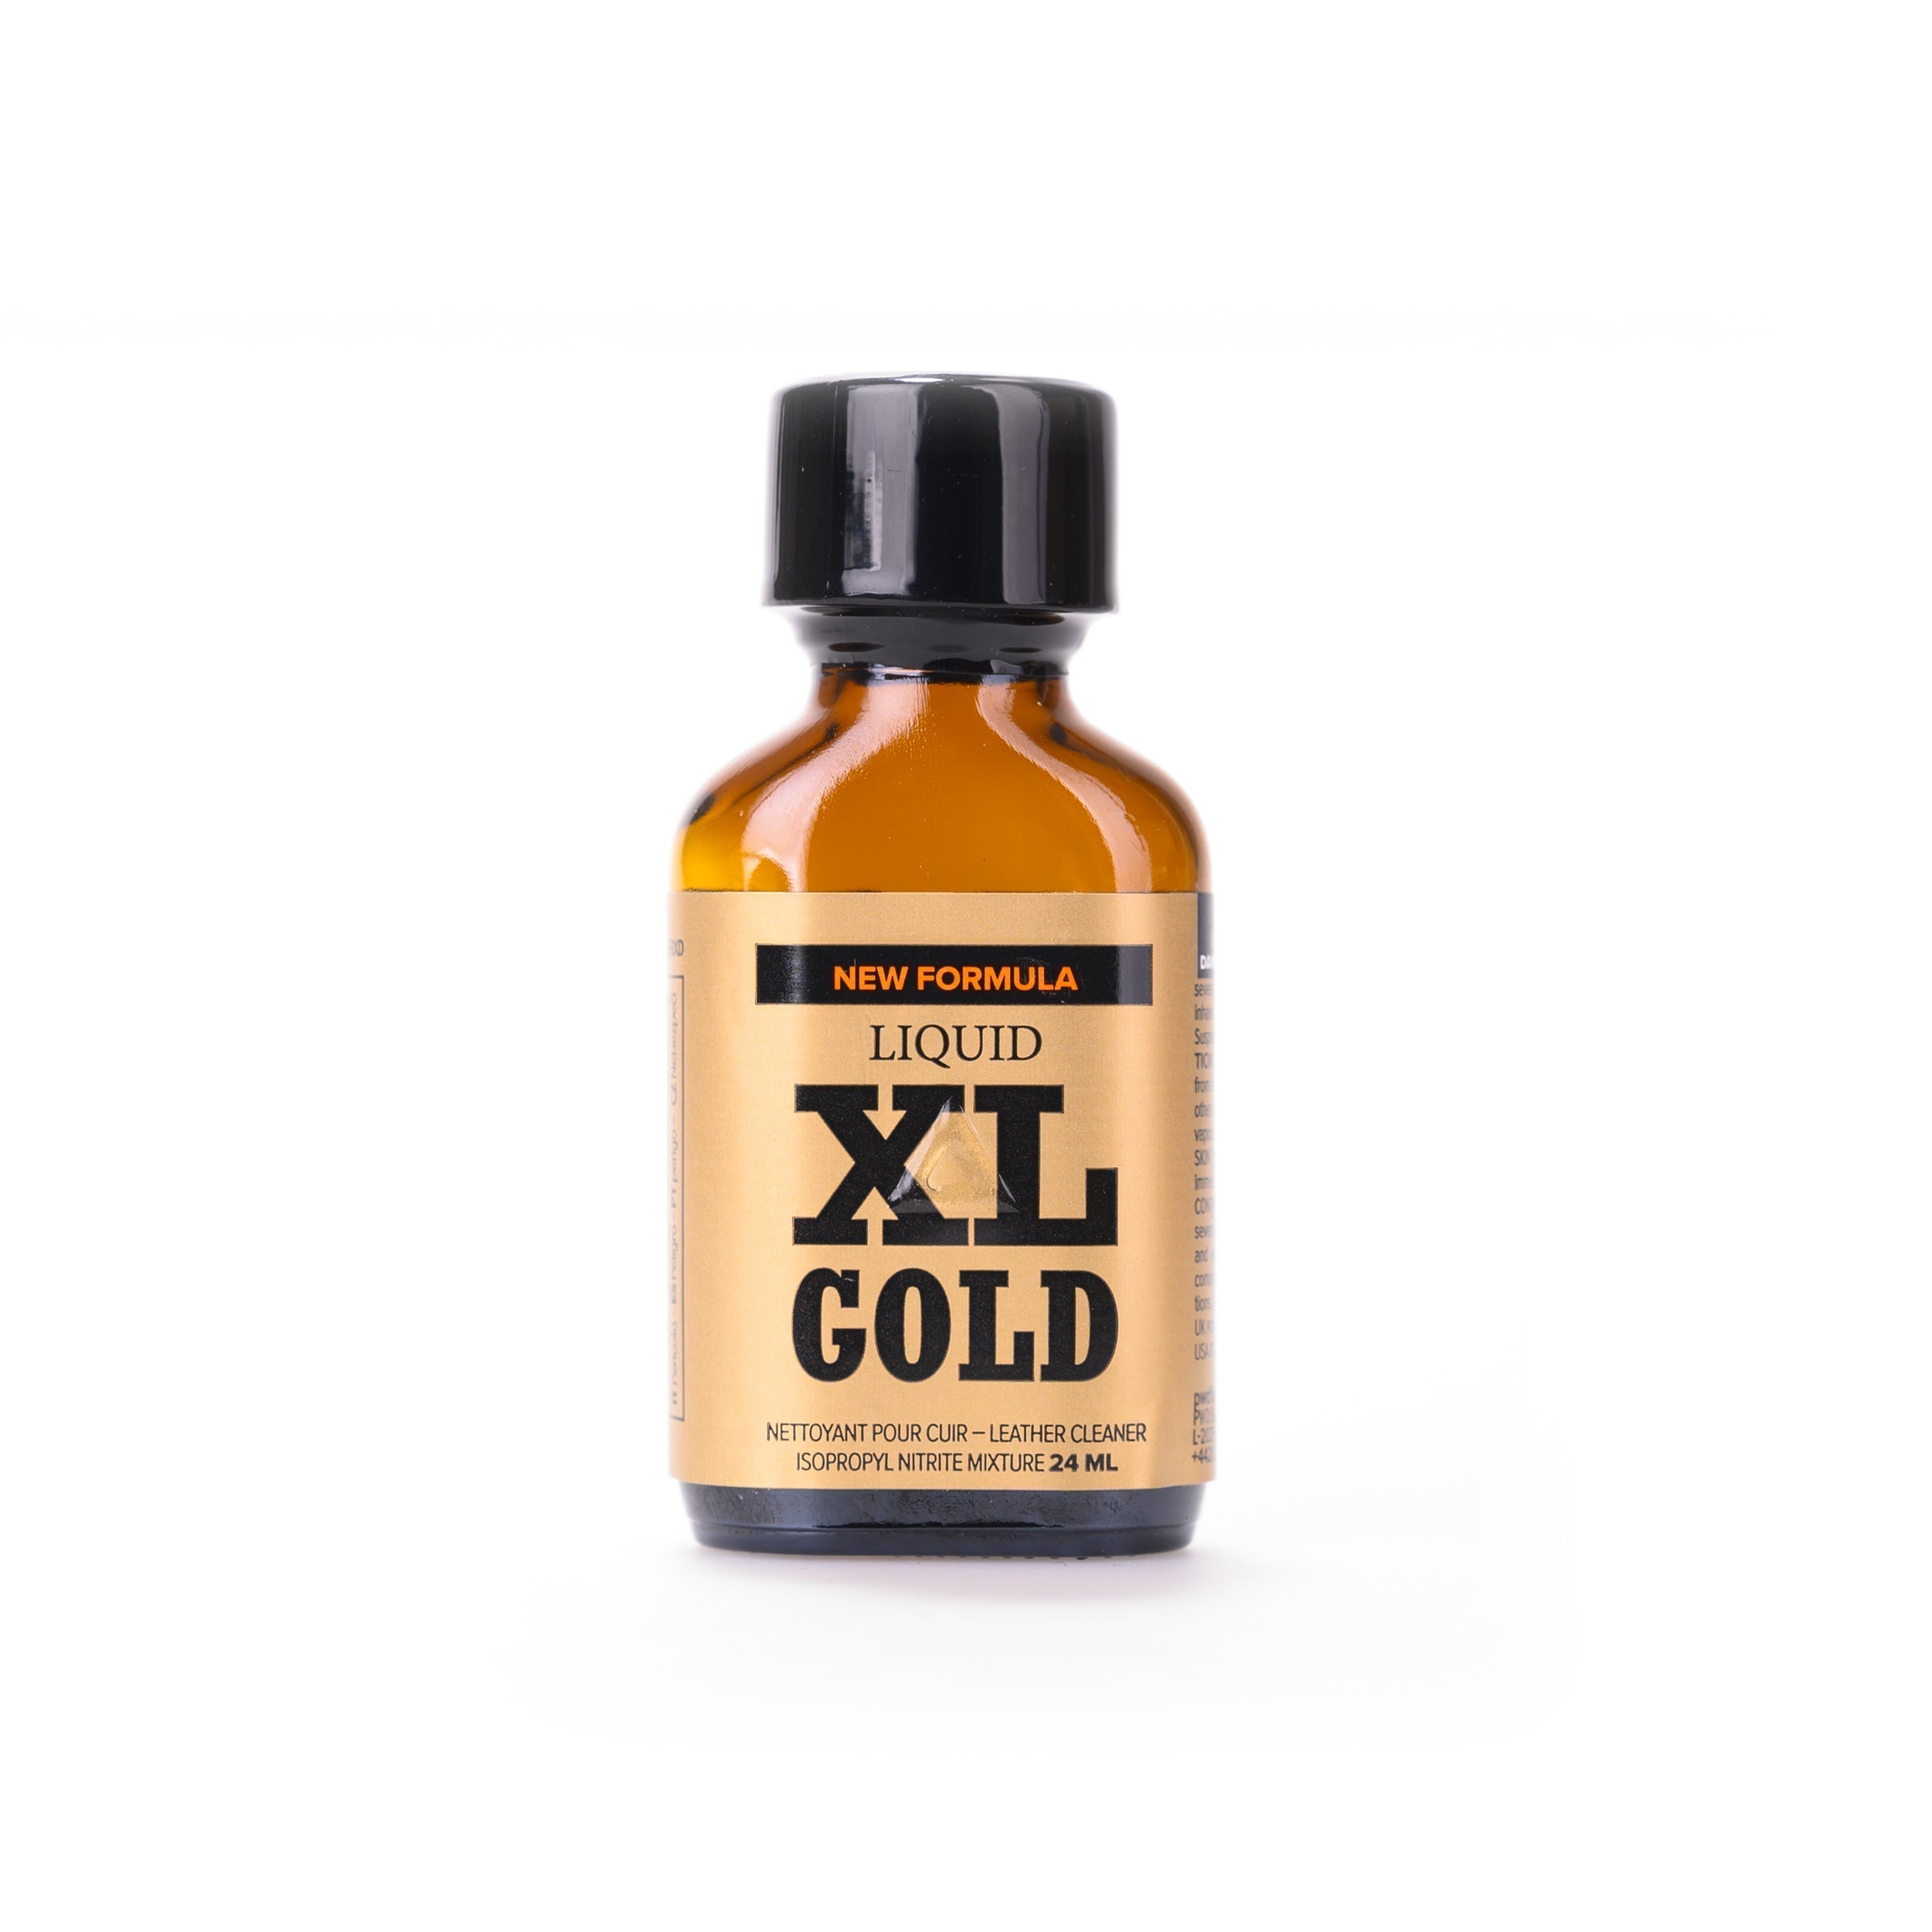 XLGOLD 24ml, POPPERS UK, POPPERS USA, FREE DELIVERY, NEXT DAY DELIVERY